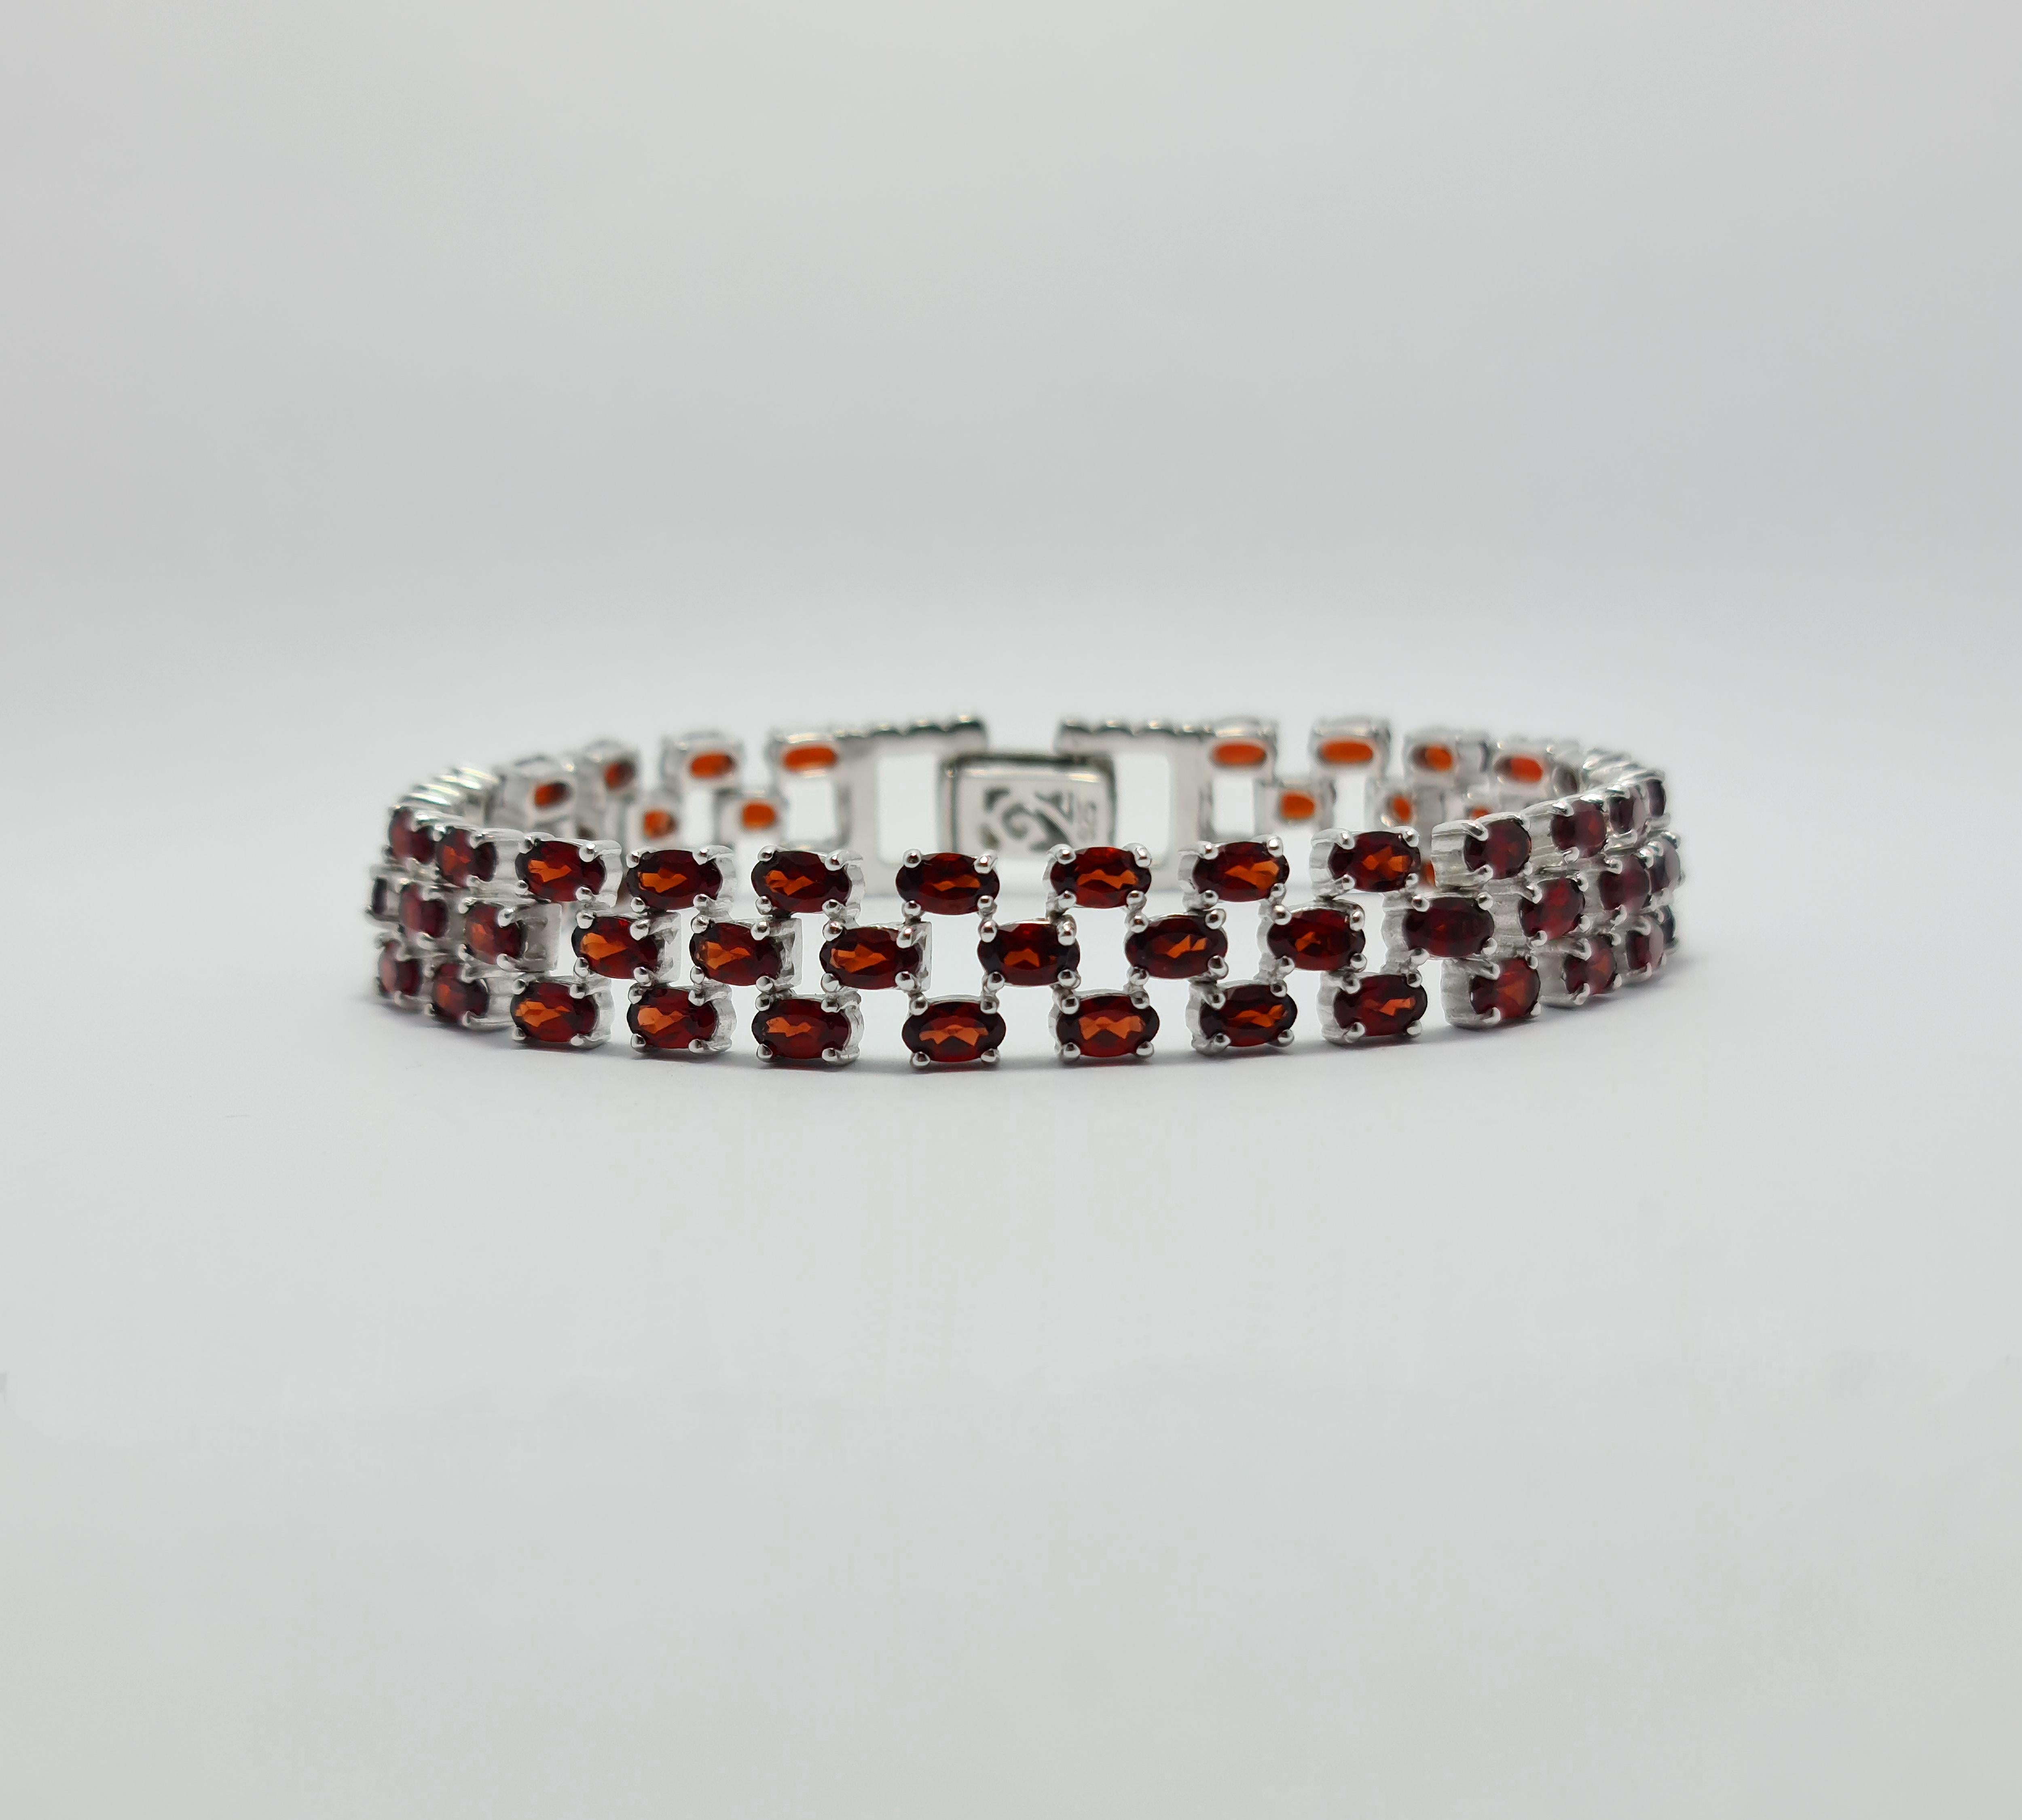 Natural Garnet Tennis Bracelet set in Pure 925 Sterling Silver with Rhodium Plating

Carat weight: 22 carats
Total bracelet weight: 24 grams
The Length of the Bracelet is 7.5 inches